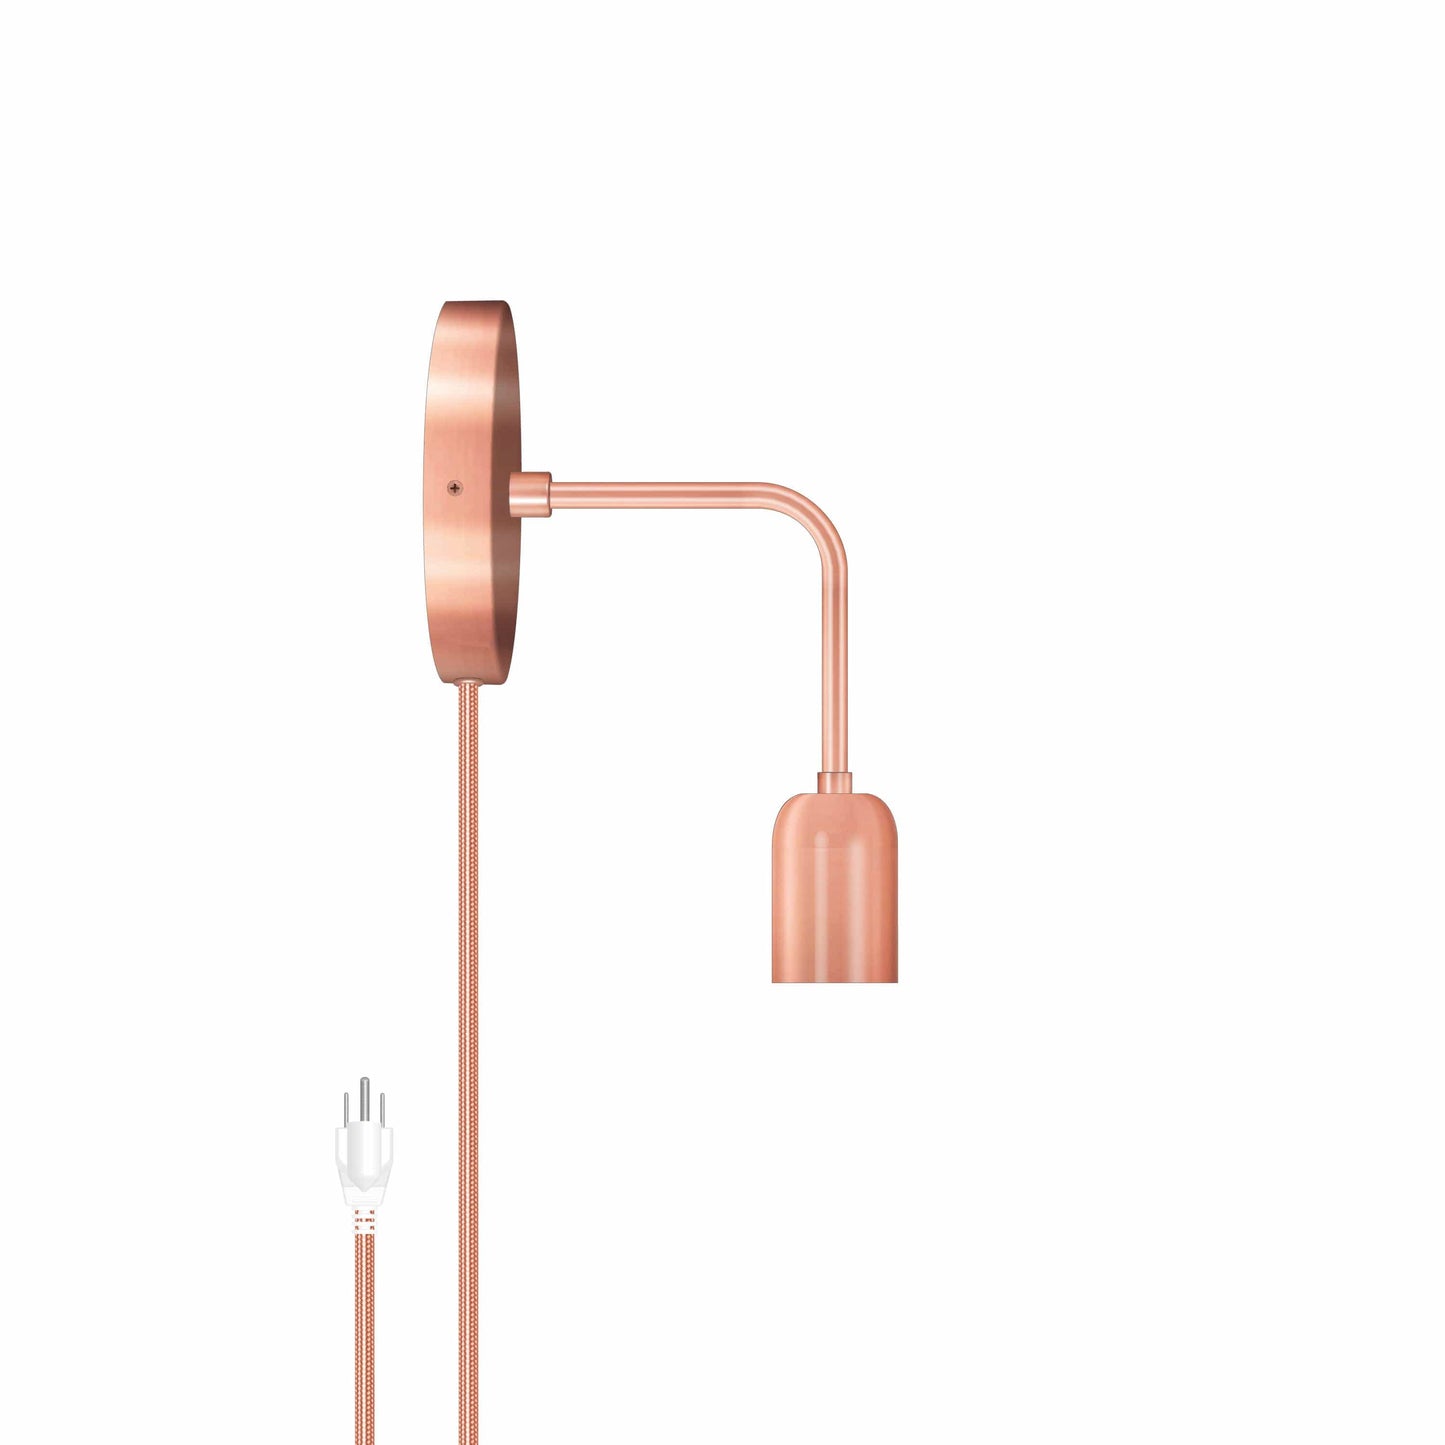 Customize: Bend Solo Plug-In Sconce